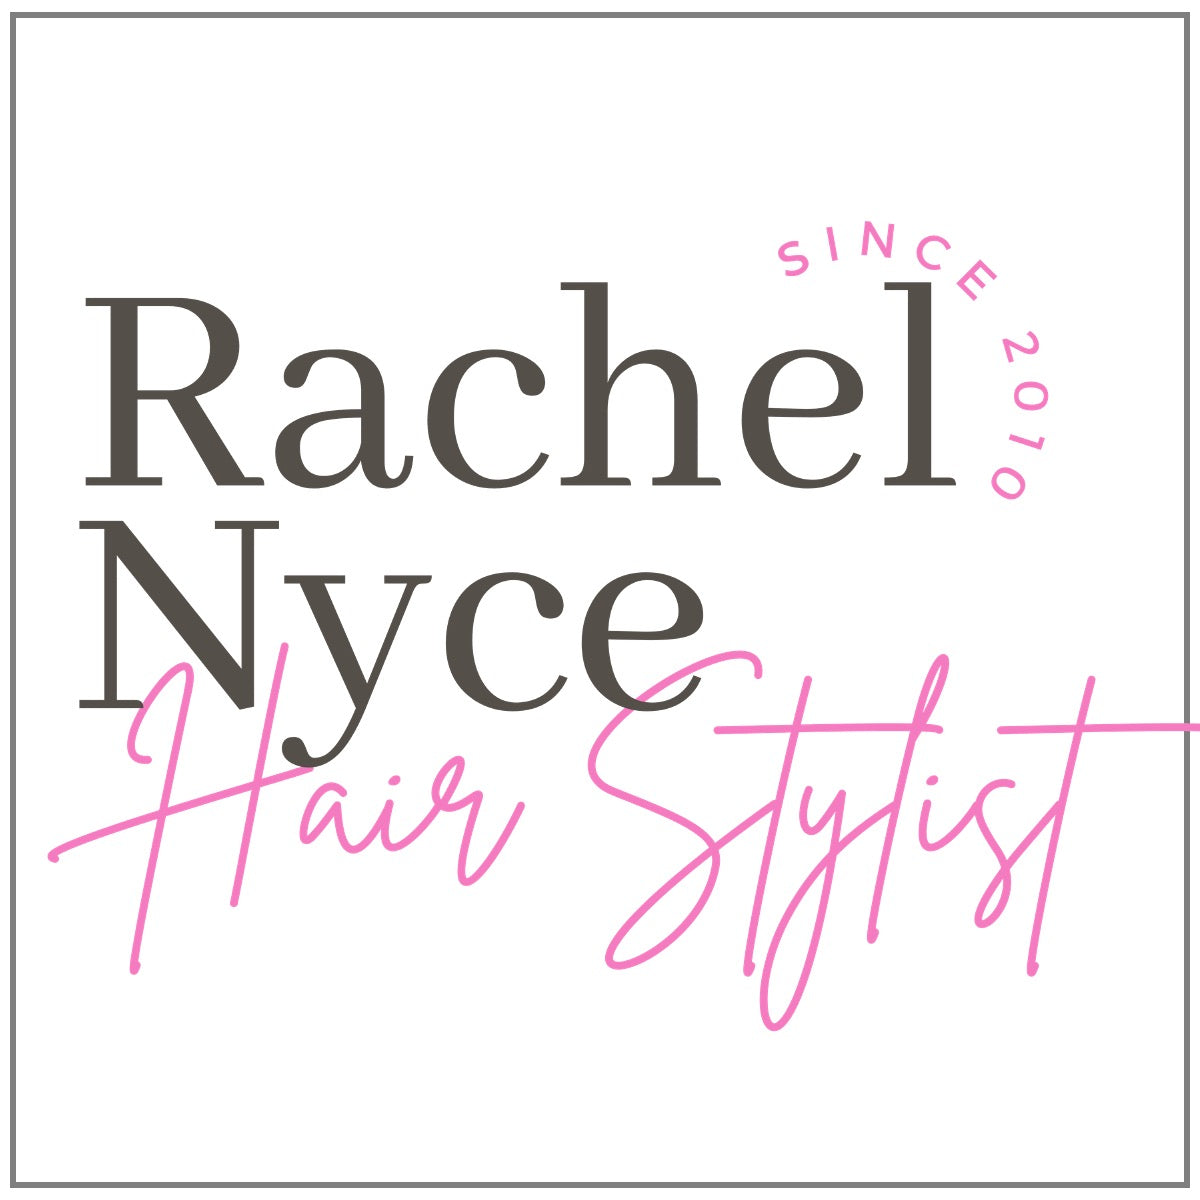 Rachel Nyce on "Superfoods for Hair"